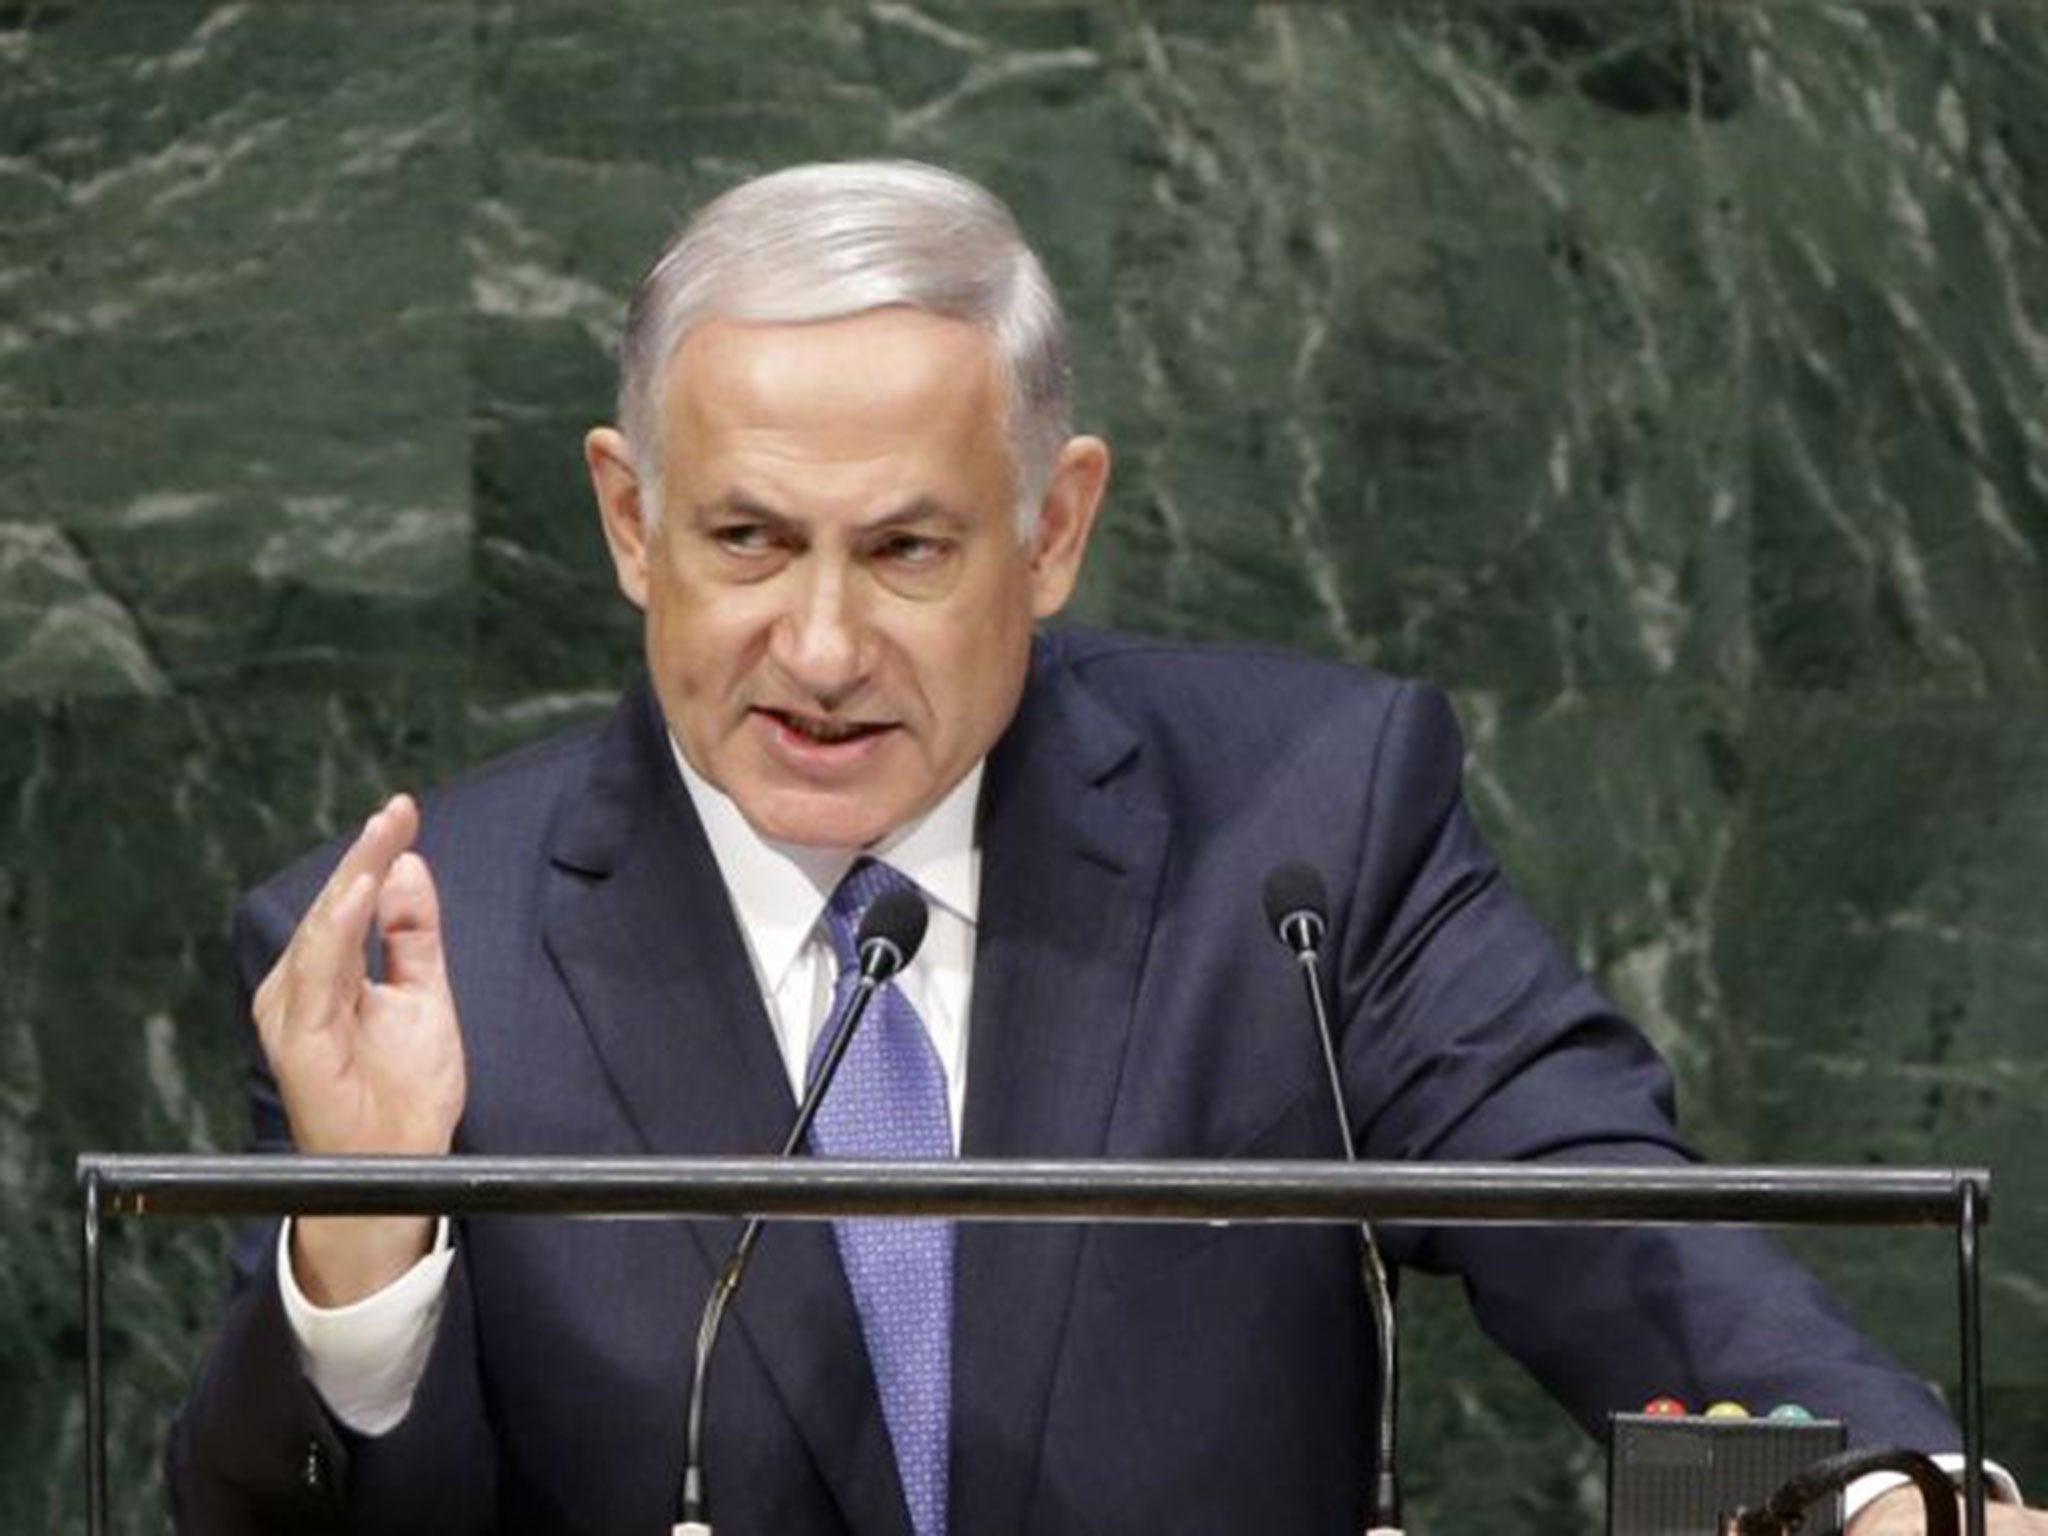 The Prime Minister of Israel spoke during the 69th session of the United Nations General Assembly on Monday